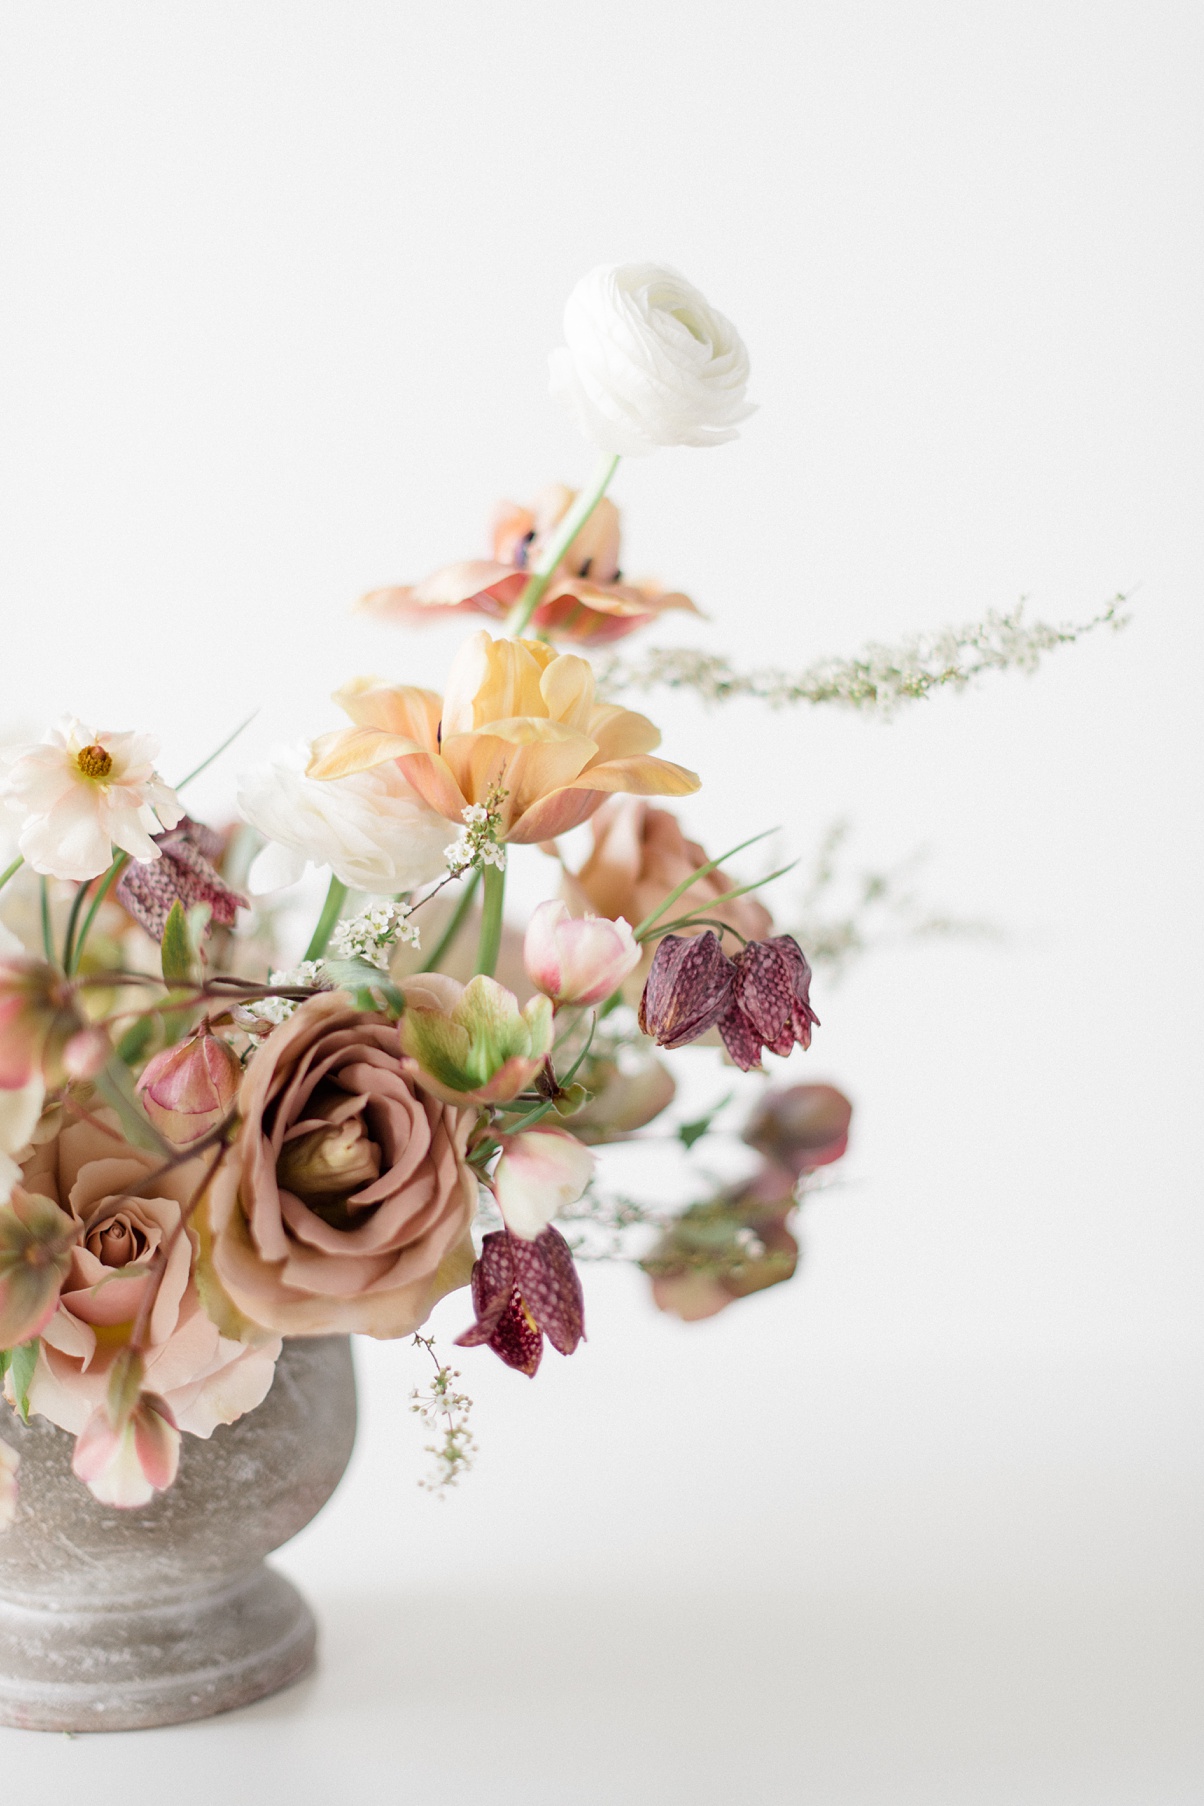 A floral compote wedding centerpiece with white, taupe, mauve, and blush spring flowers